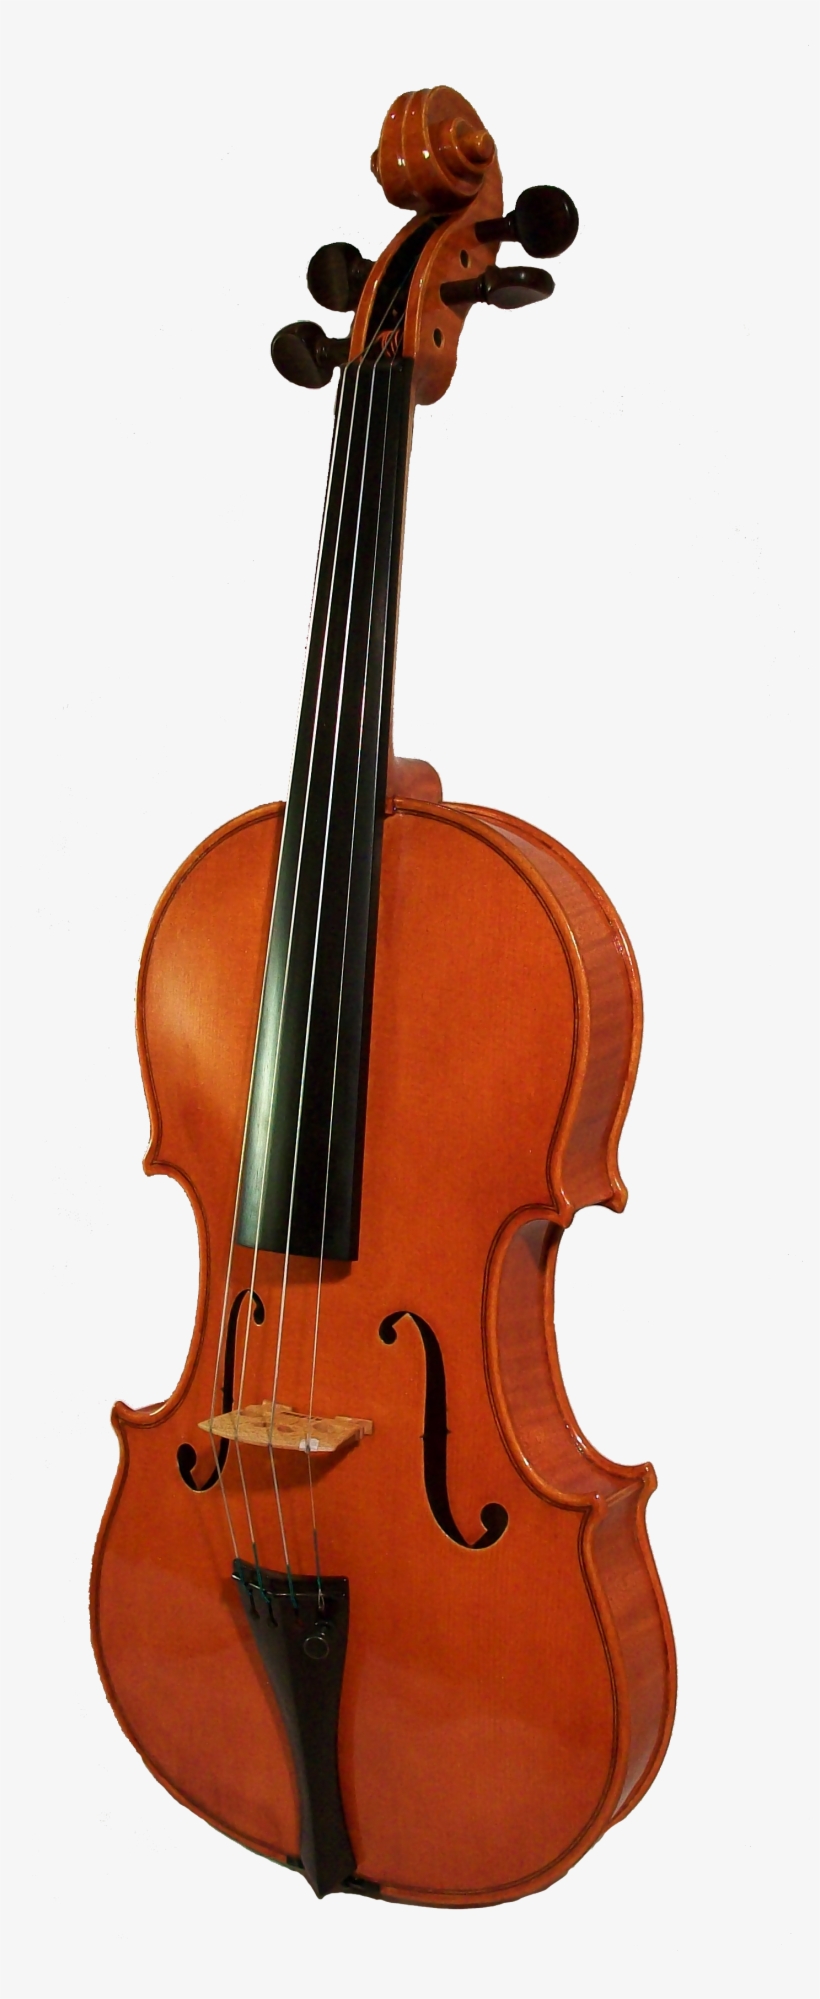 Violin With No Background, transparent png #448237